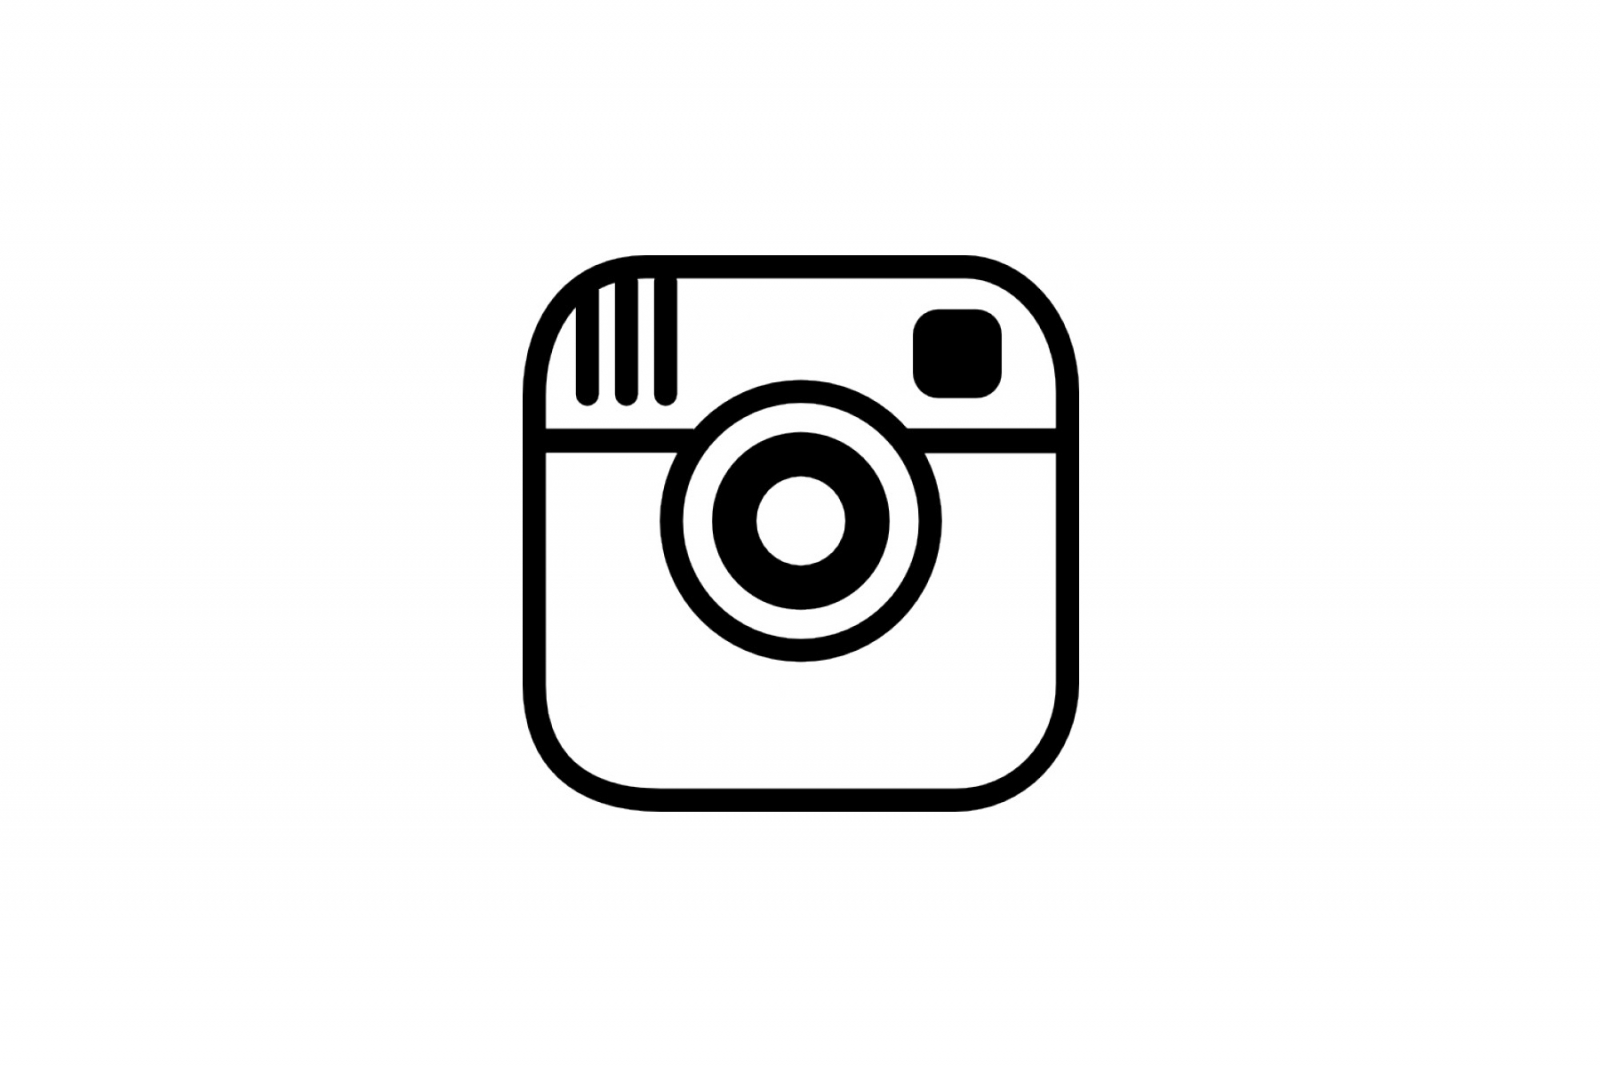 Instagram Logo Black And White Png / 53,000+ vectors, stock photos ...